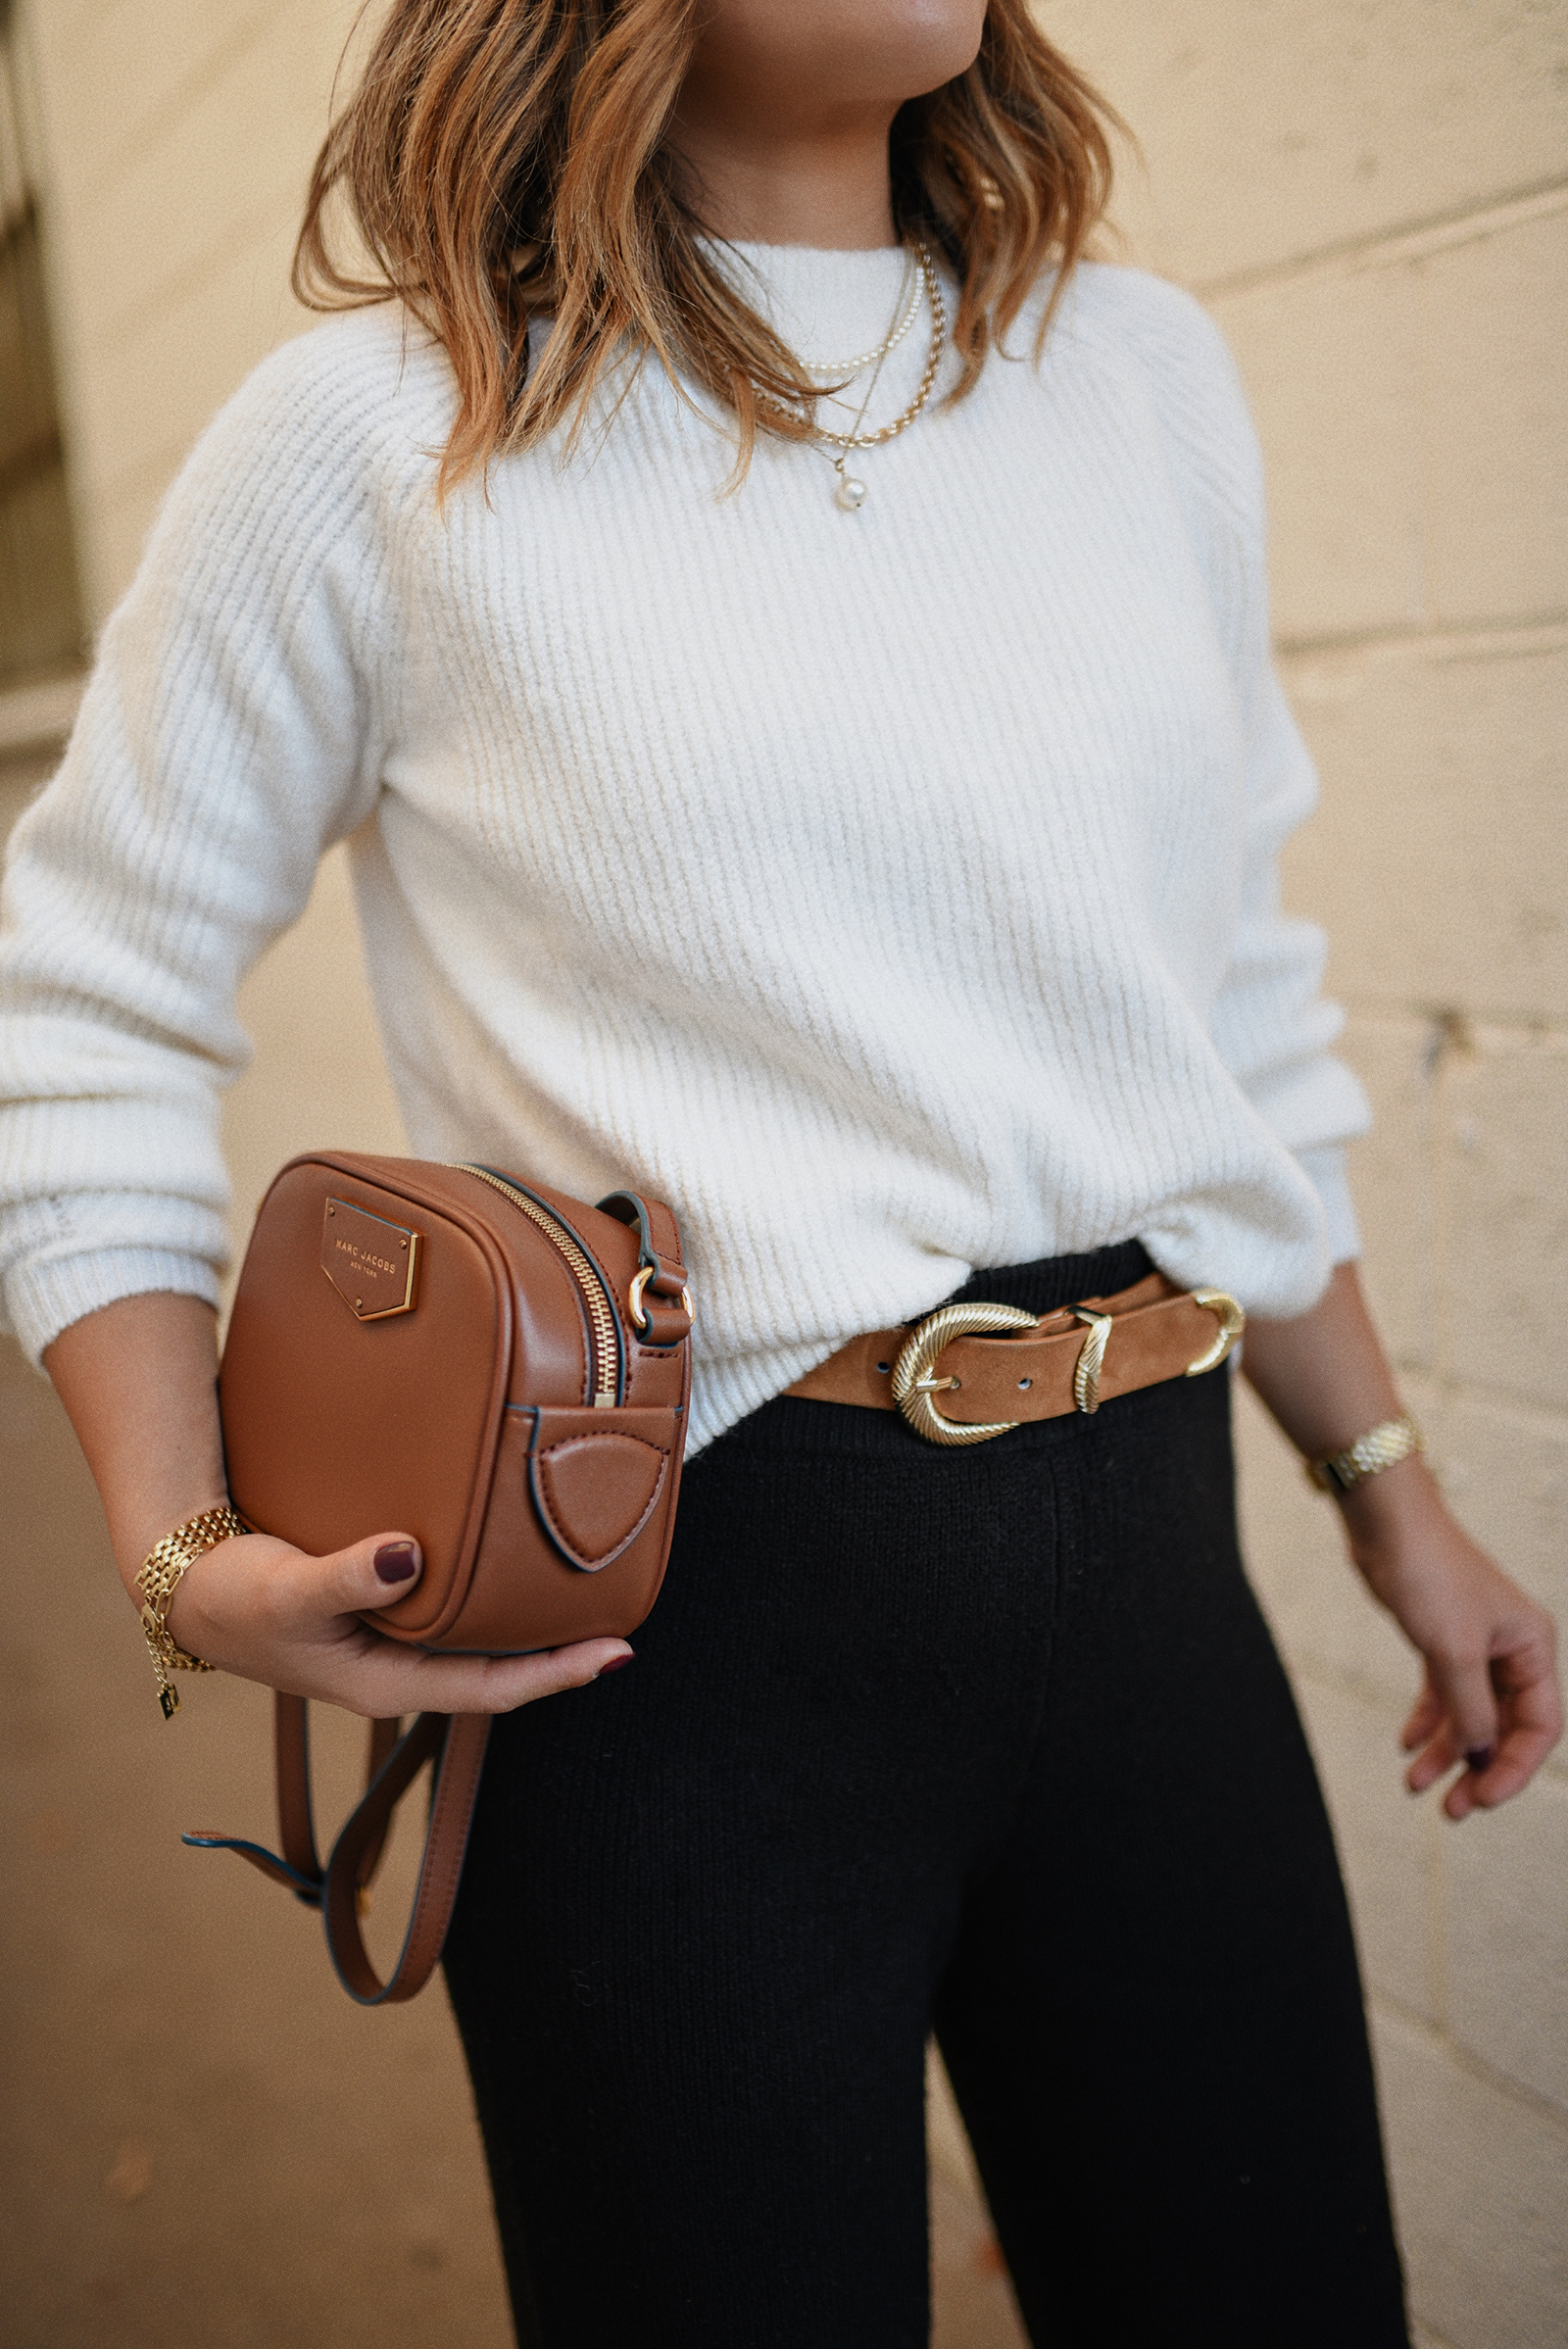 Carolina Hellal of Chic Talk wearing a Marc & Spencer white knit sweater, Express knit wide leg pants ,Steve Madden suede pumps and Marc Jacobs crossbody bag.